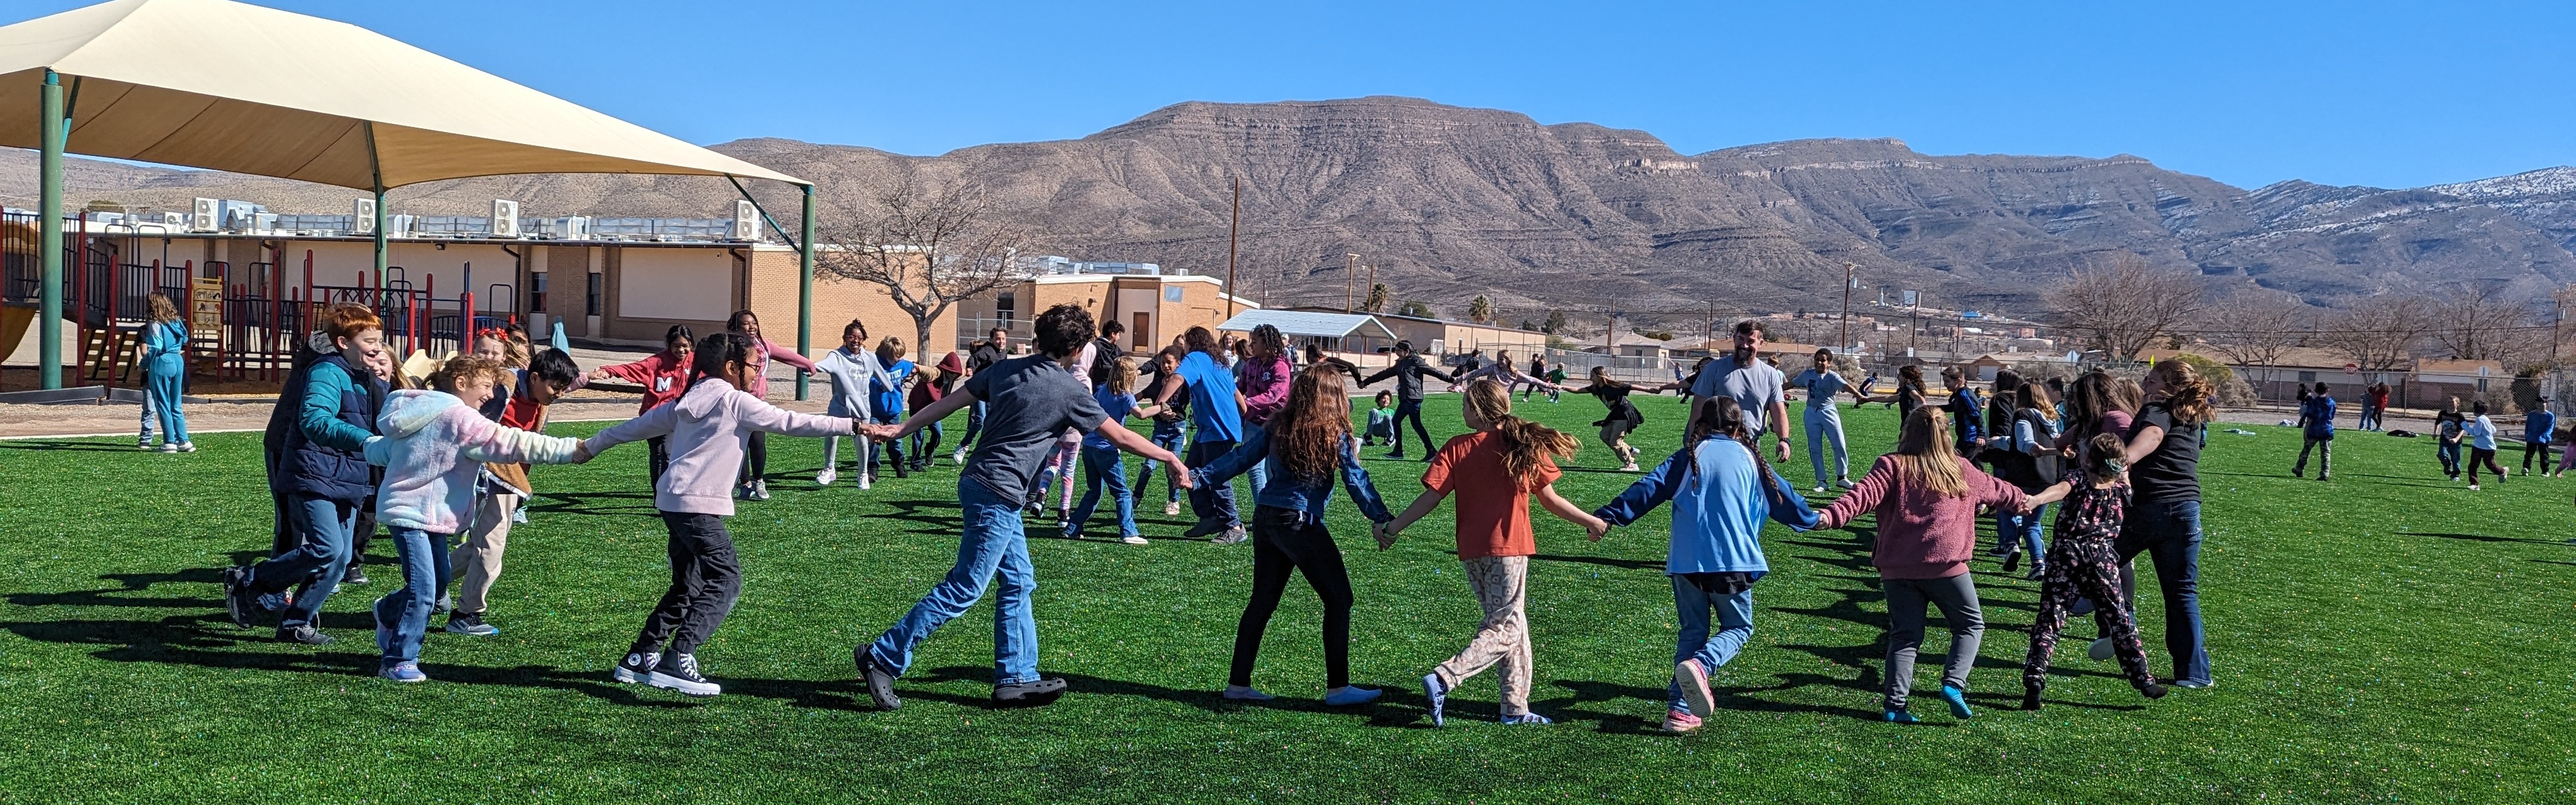 Students holding hands in a circle on green turf field with mountains in the background